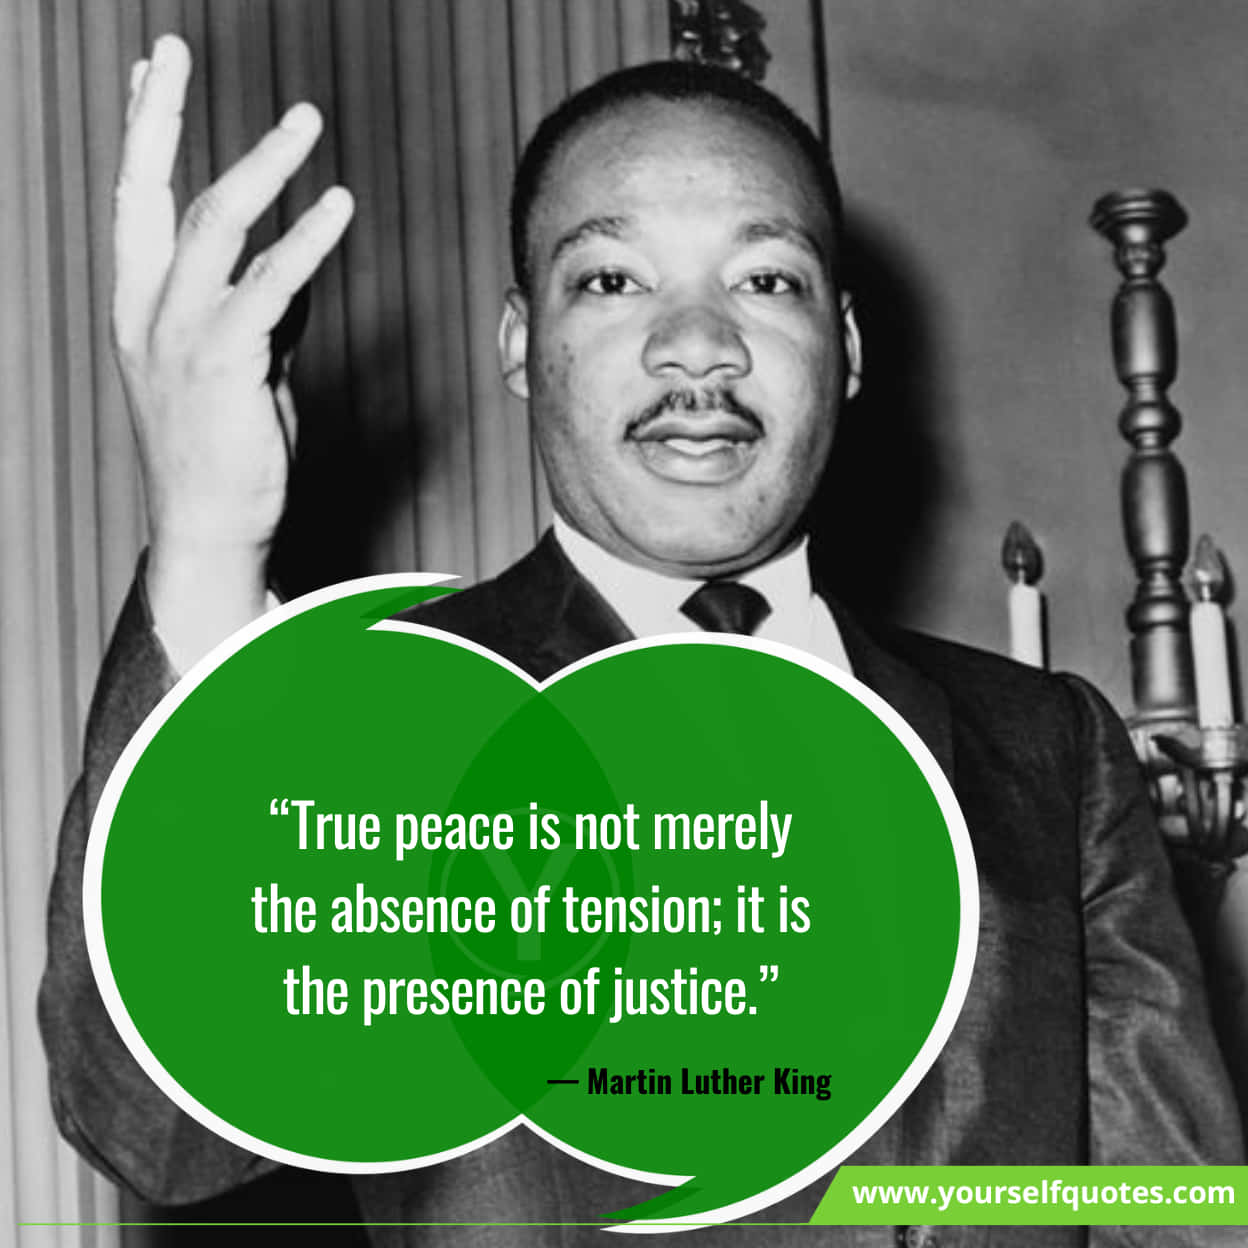 Motivational Martin Luther King, Jr. Quotes On Peace